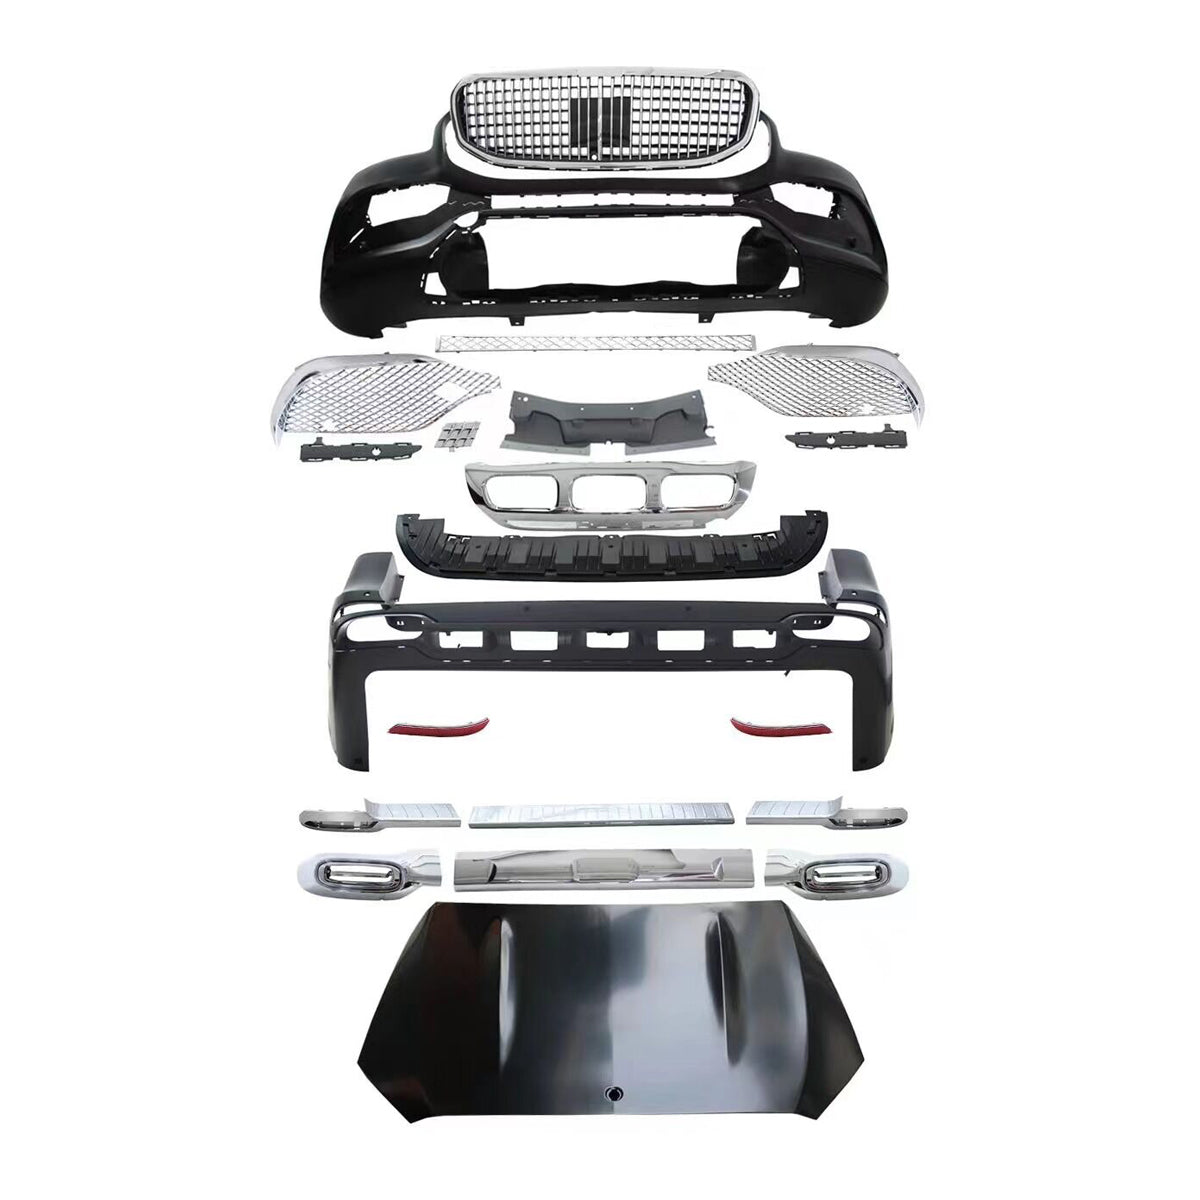 BODY KIT FOR V-CLASS W447 2016-2020 UPGRADE TO GLS MAYBACH TYPE(A TYPE)